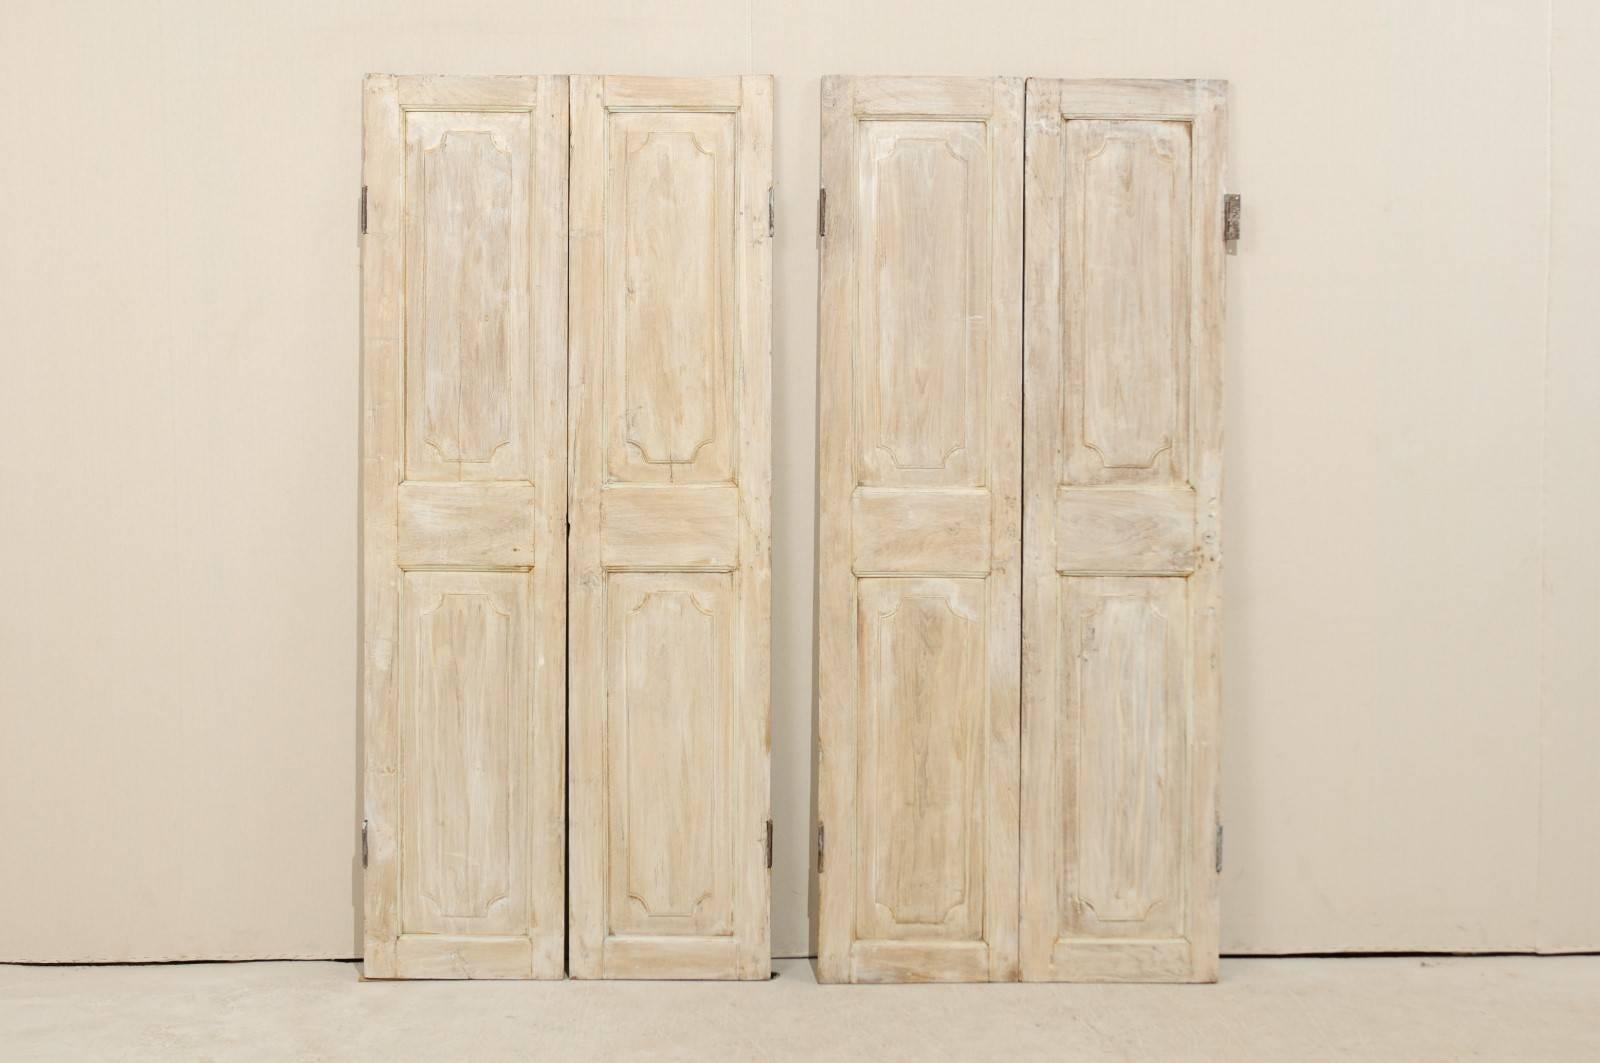 A pair of 19th century French doors. There are two pairs in the photographs, we now have only one pair available. This exquisite pair of French doors has two recessed panels on both sides which are vertically rectangular in shape, with carved